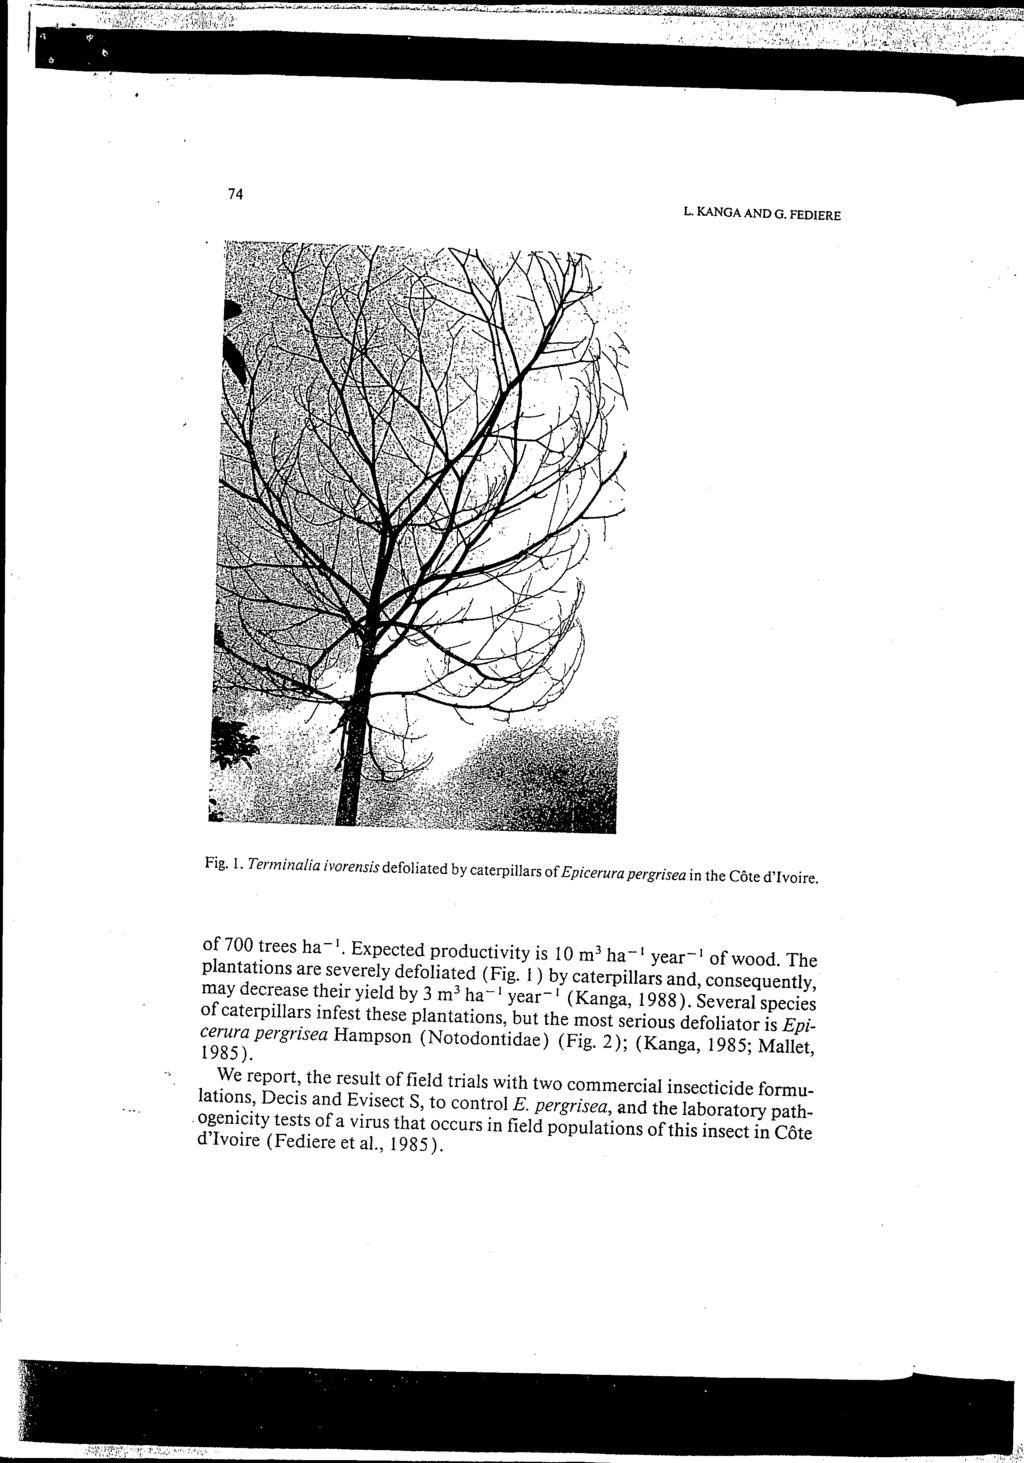 74 L. UNGA AND G. FEDIERE Fig. 1. Tertninalia ivorensis defoliated by caterpillars of Epicerurapergrisea in the Côte d'ivoire...' of 700 trees ha-'. Expected productivity is 10 m3 ha-' year-' of wood.